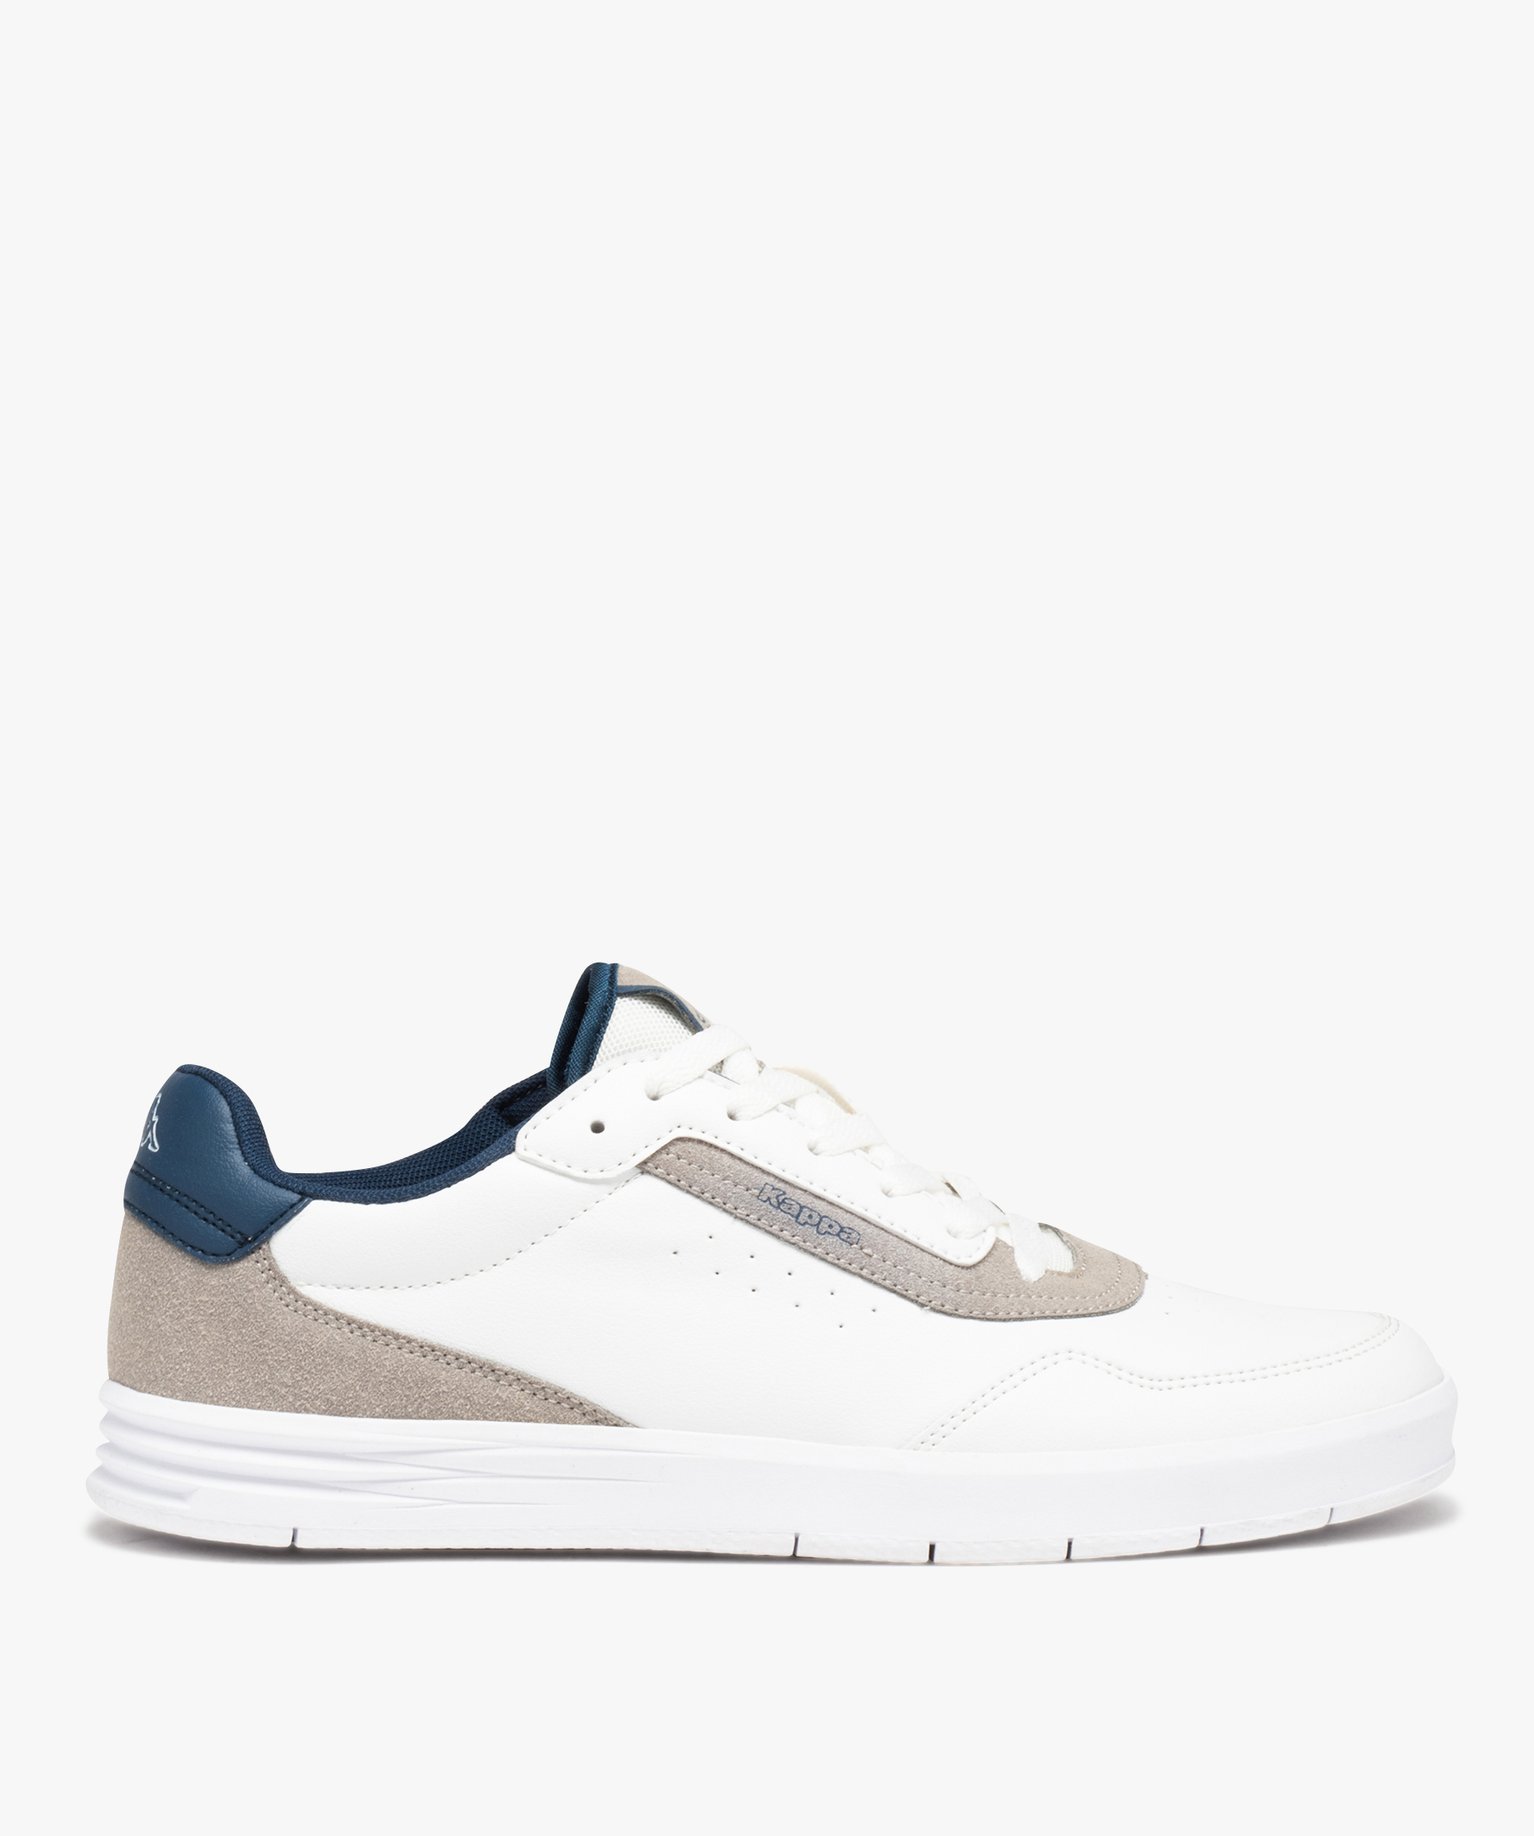 baskets homme style retro a lacets - kappa blanc